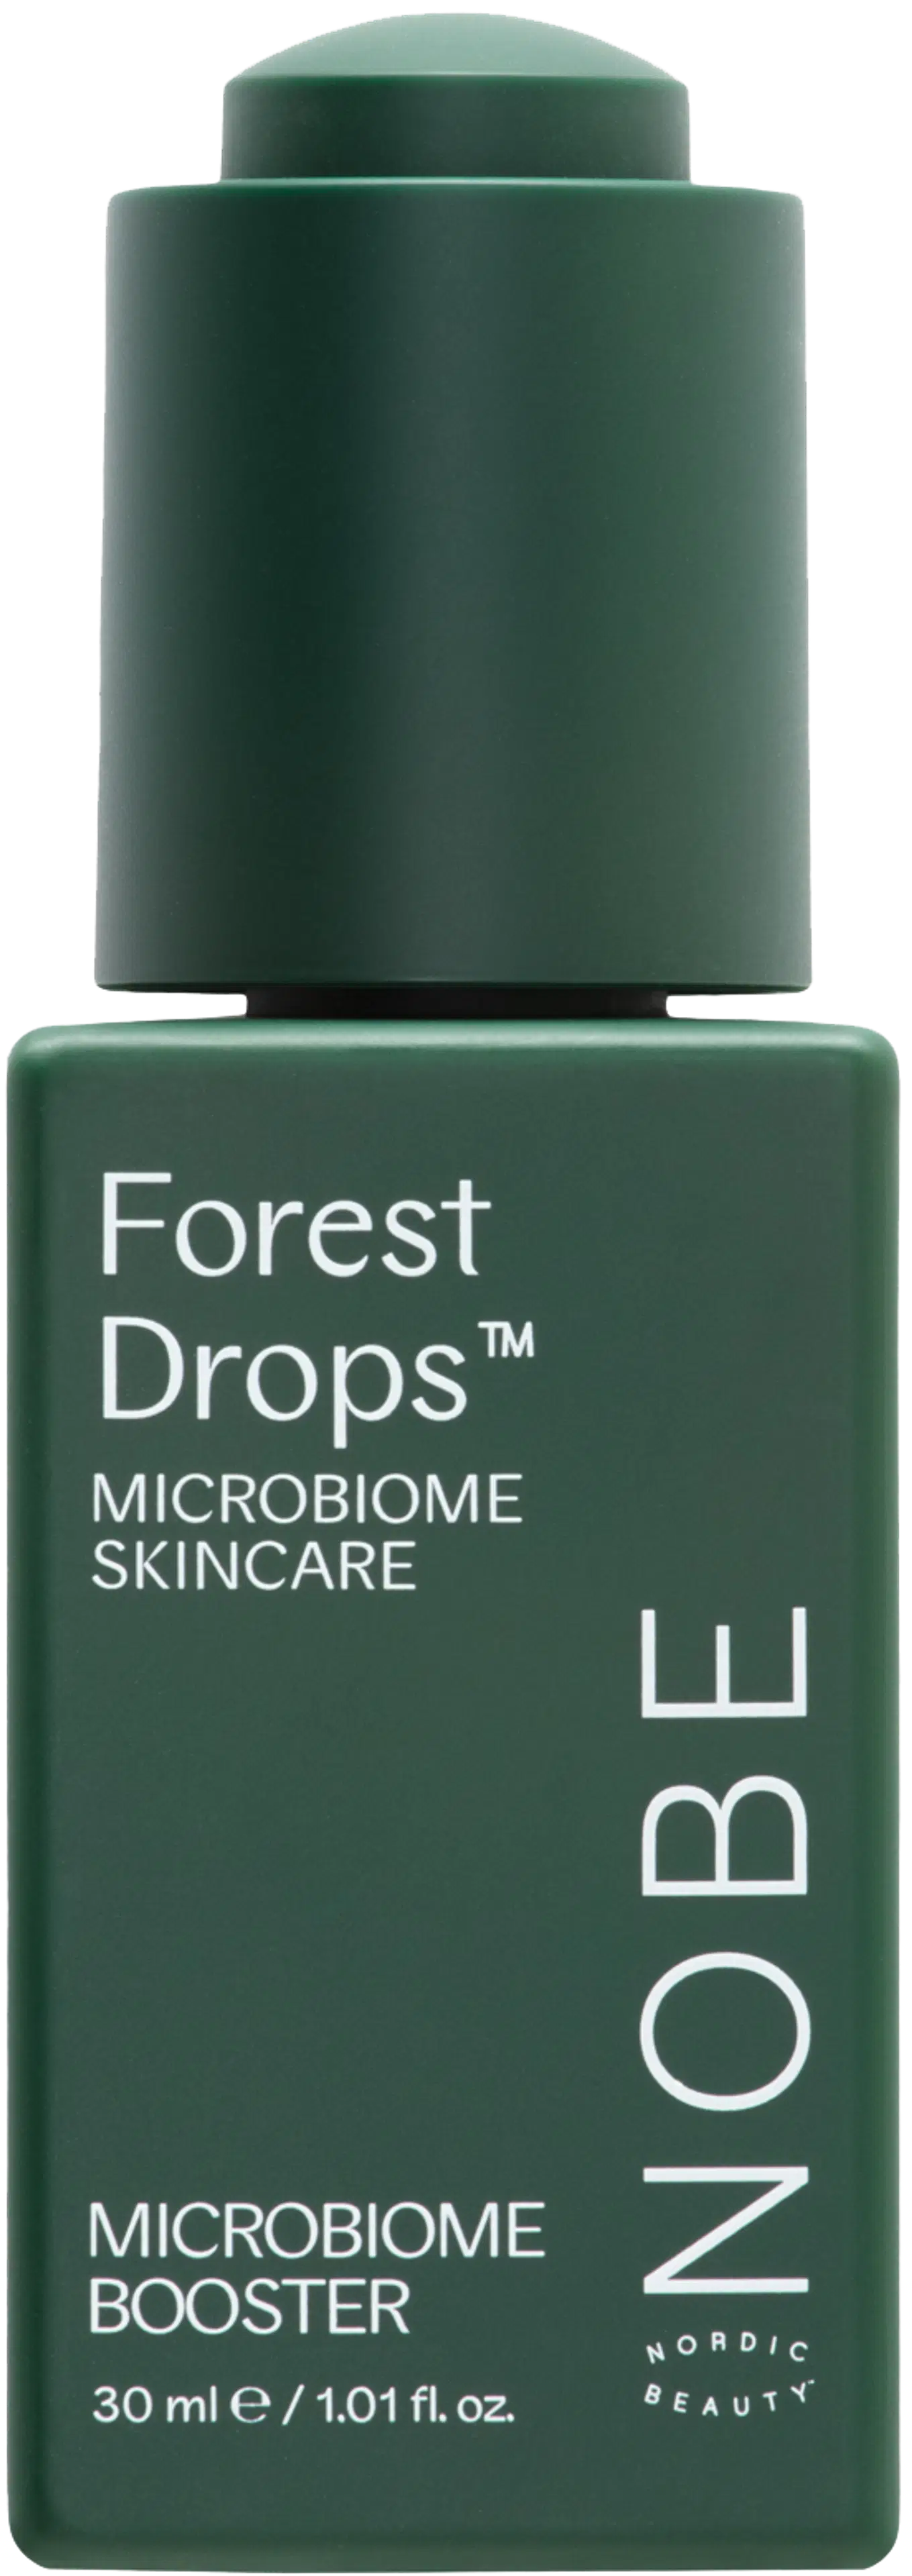 NOBE Nordic Beauty Forest Drops™ Microbiome Booster seerumi 30 ml